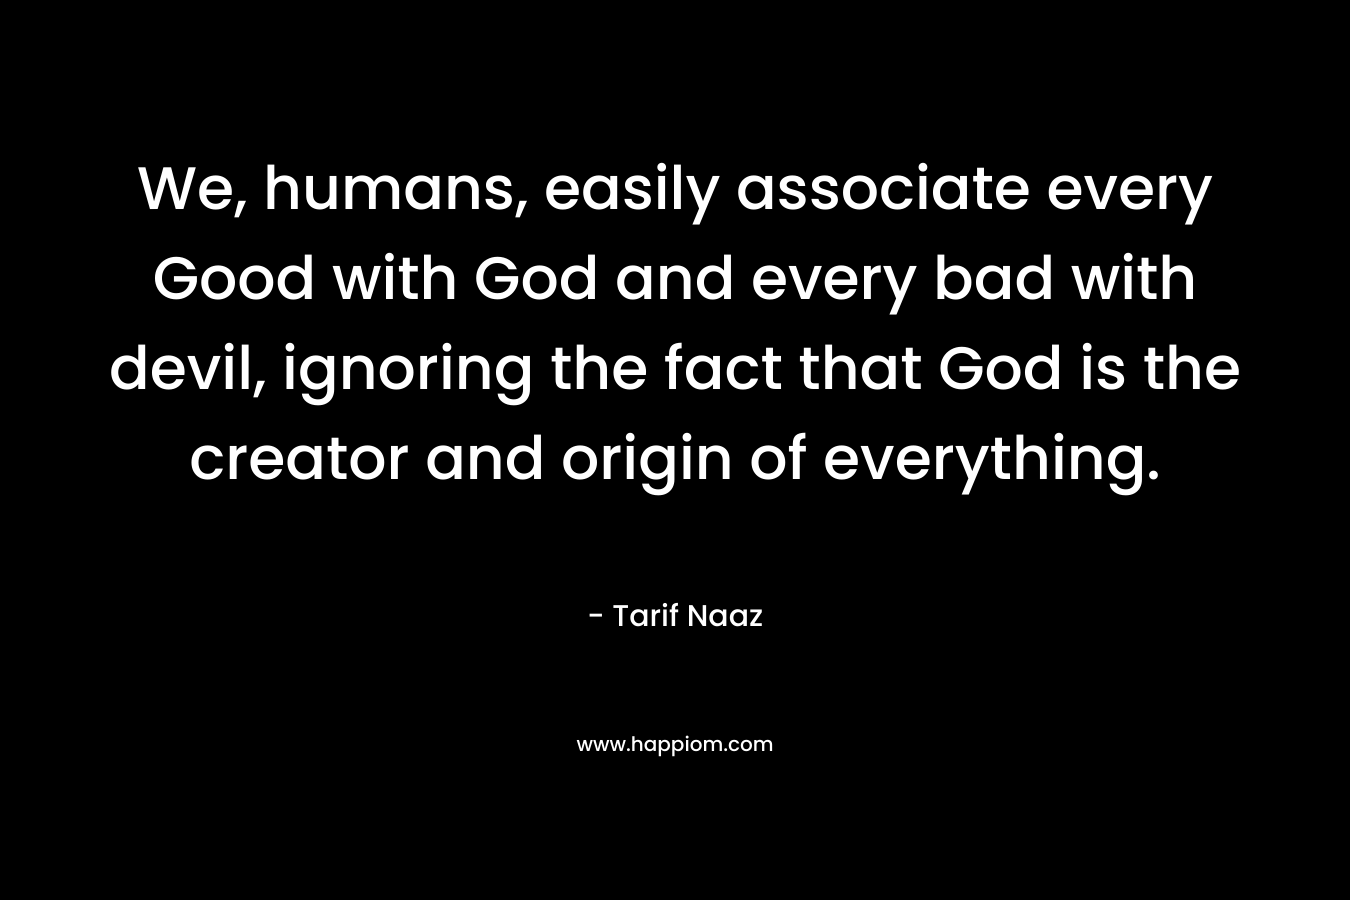 We, humans, easily associate every Good with God and every bad with devil, ignoring the fact that God is the creator and origin of everything. – Tarif Naaz